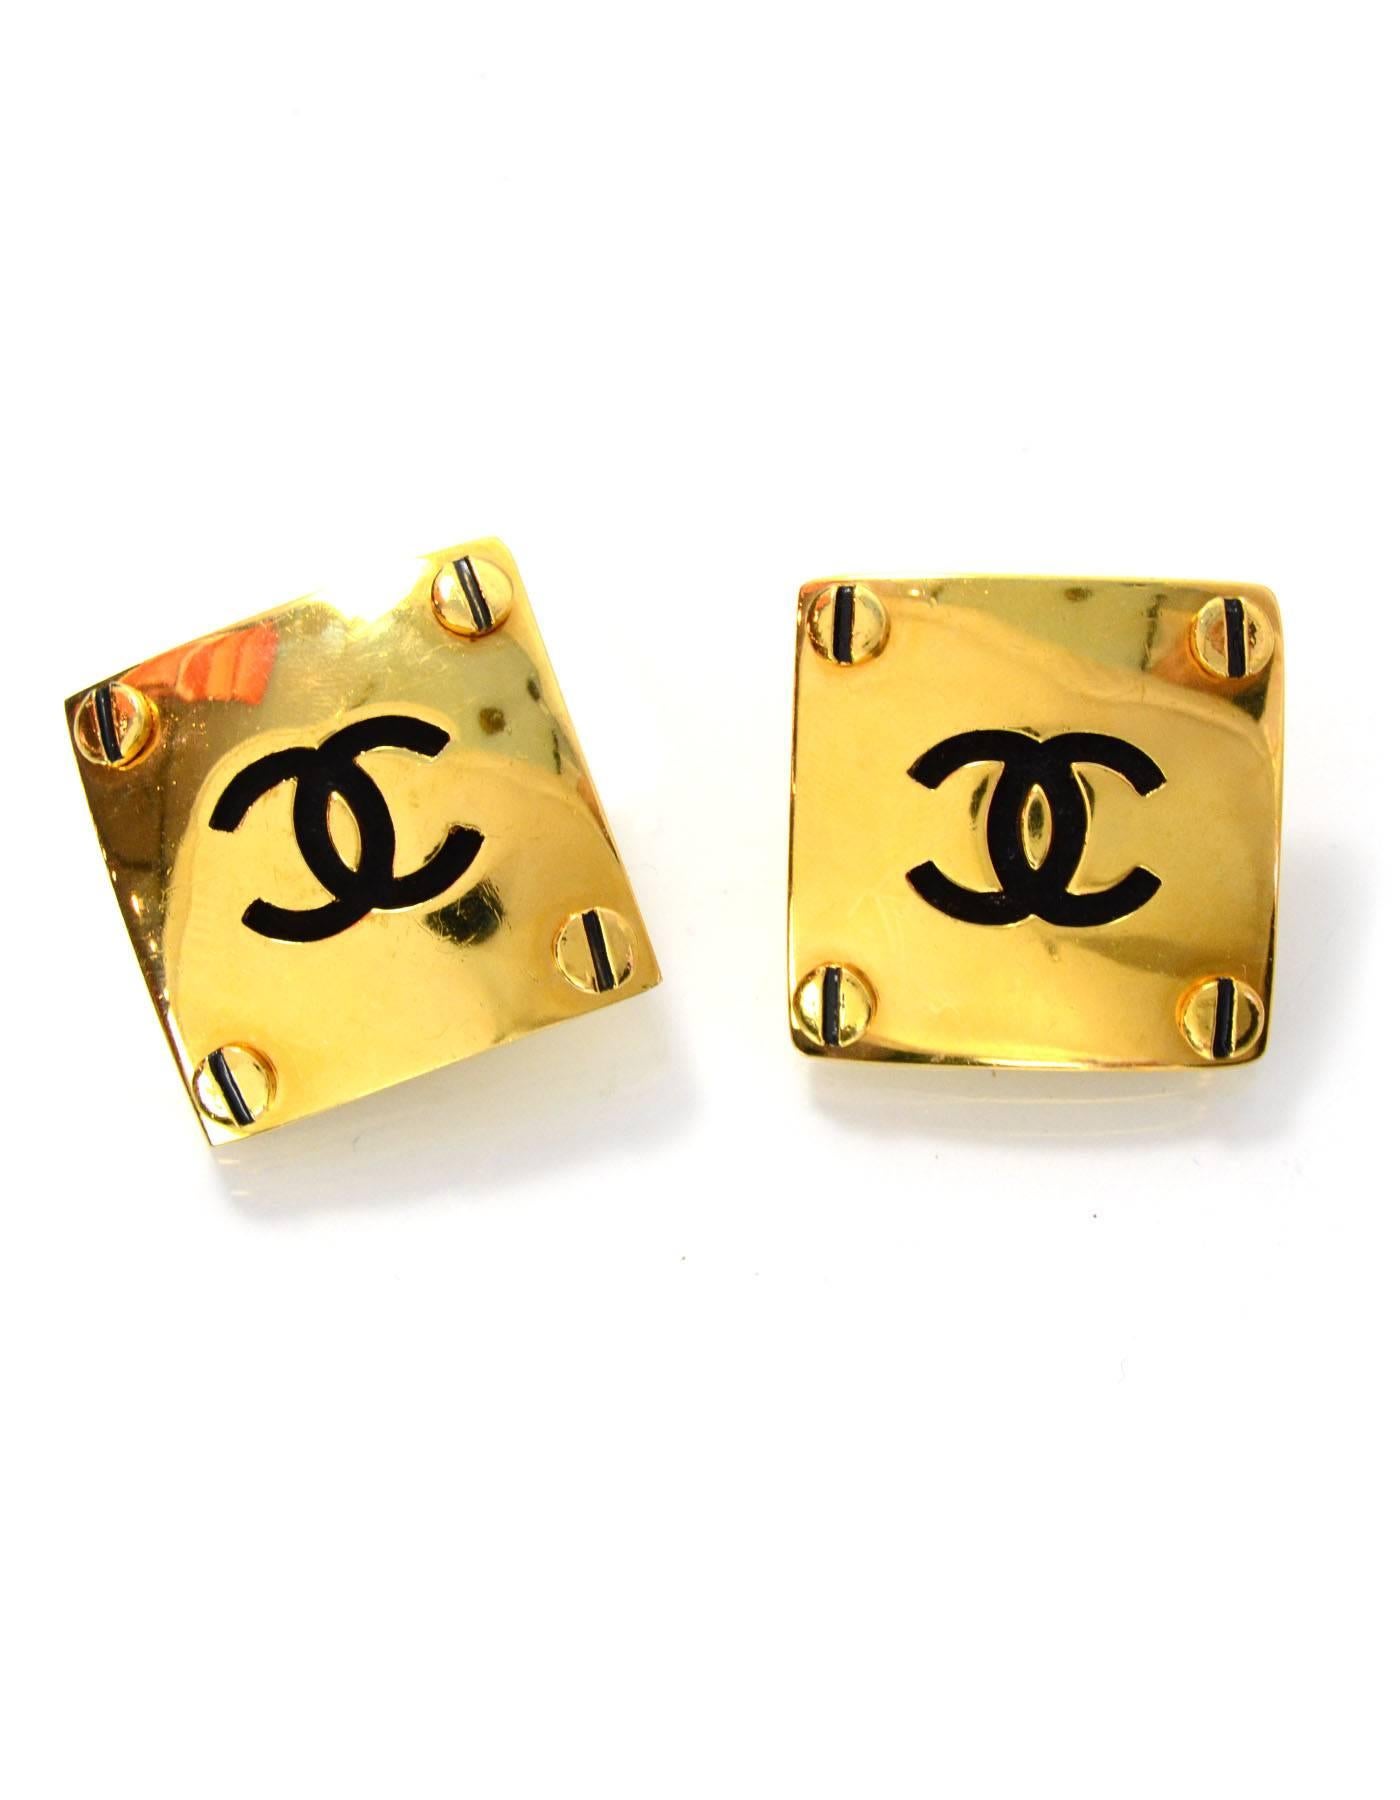 Chanel XL Square CC Clip On Earrings
Features CC's in center and four bolt details in all corners
Made In: France
Year of Production: 1989
Color: Goldtone and black
Materials: Metal 
Closure/Opening: Clip on back
Serial Number/Date Stamp: 2